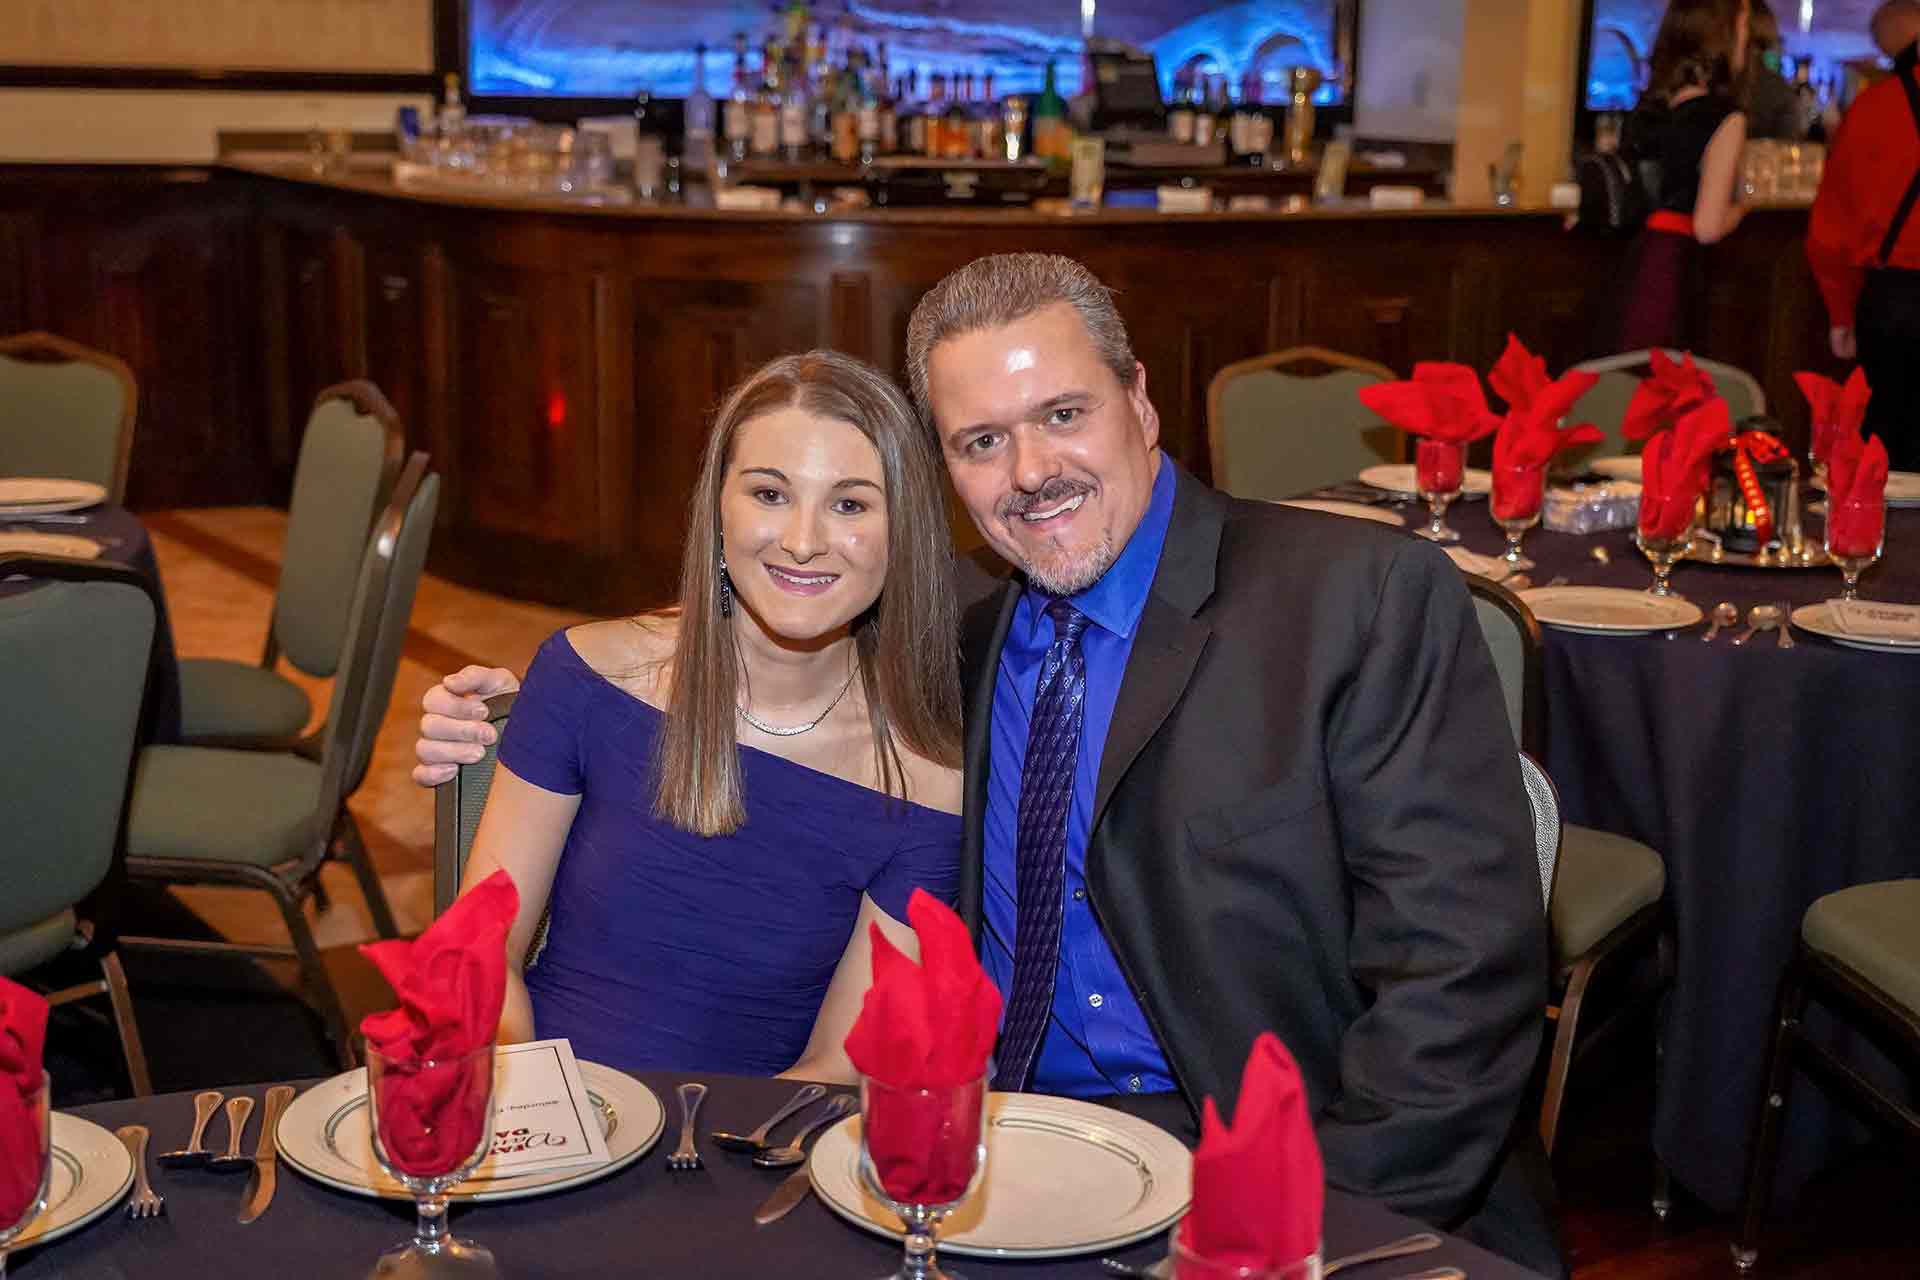 father-daughter-dance-2019-blue-dress-and-shirt